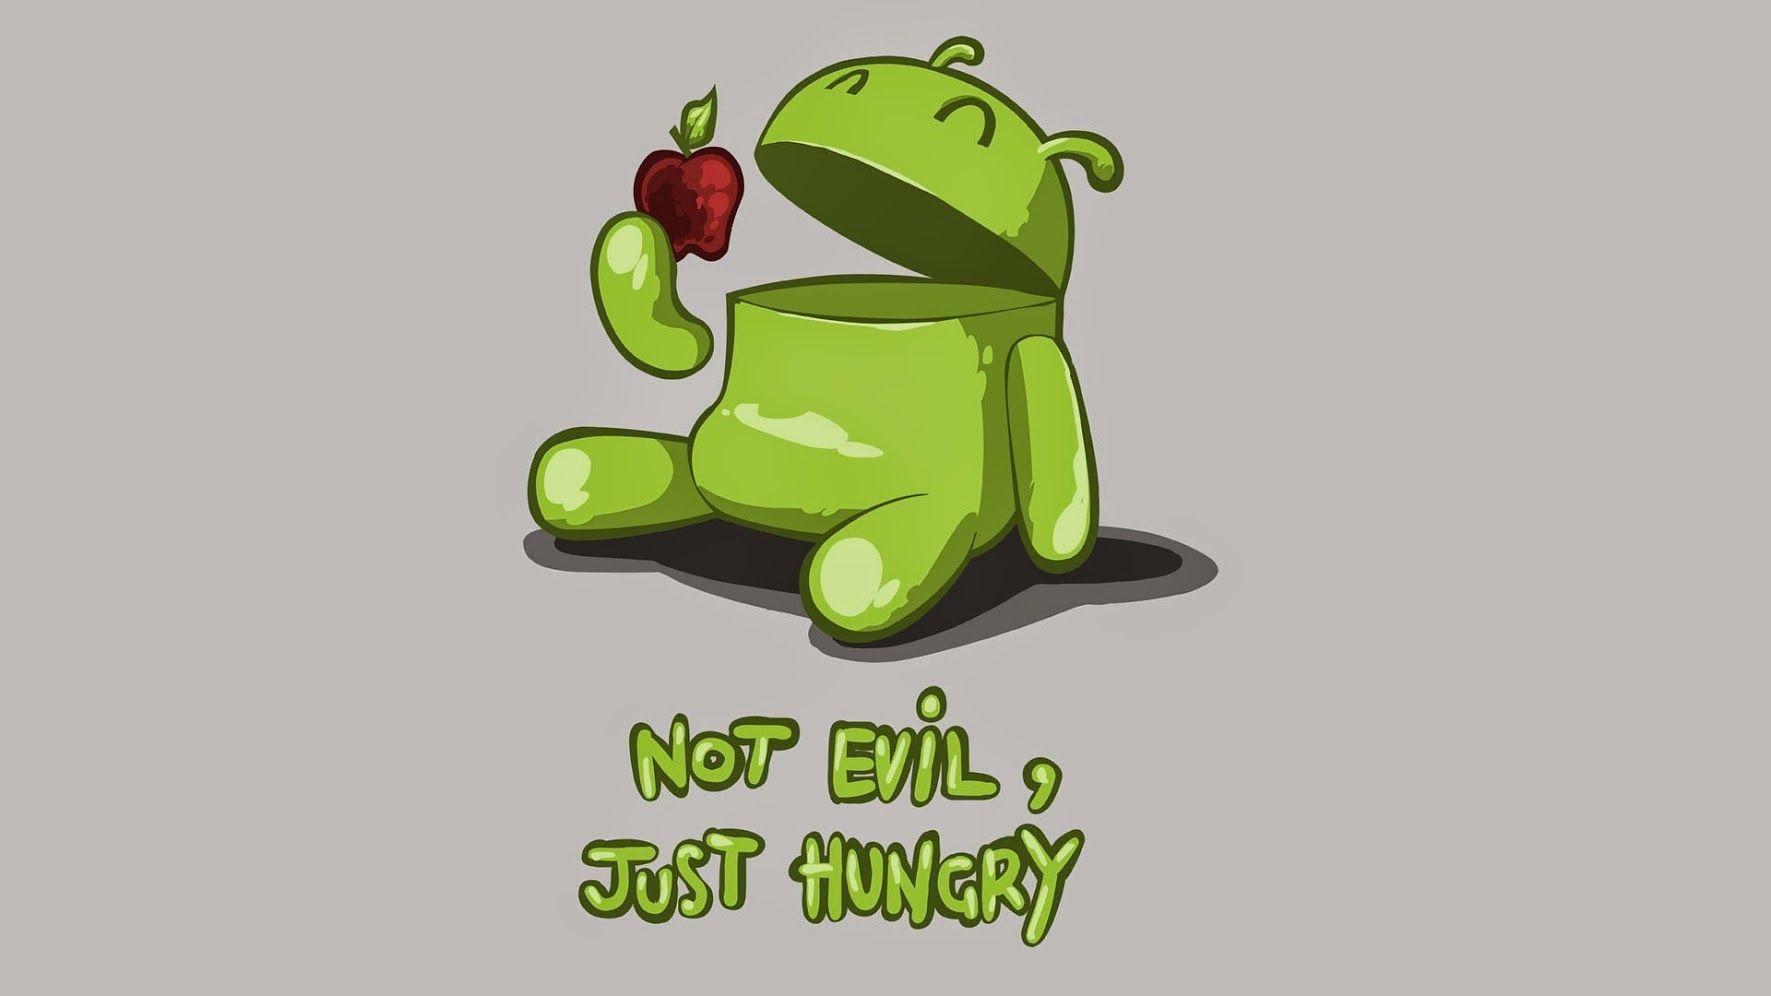 Android #eating #apple Not #evil just #hungry #LetsGetWordy. Let's